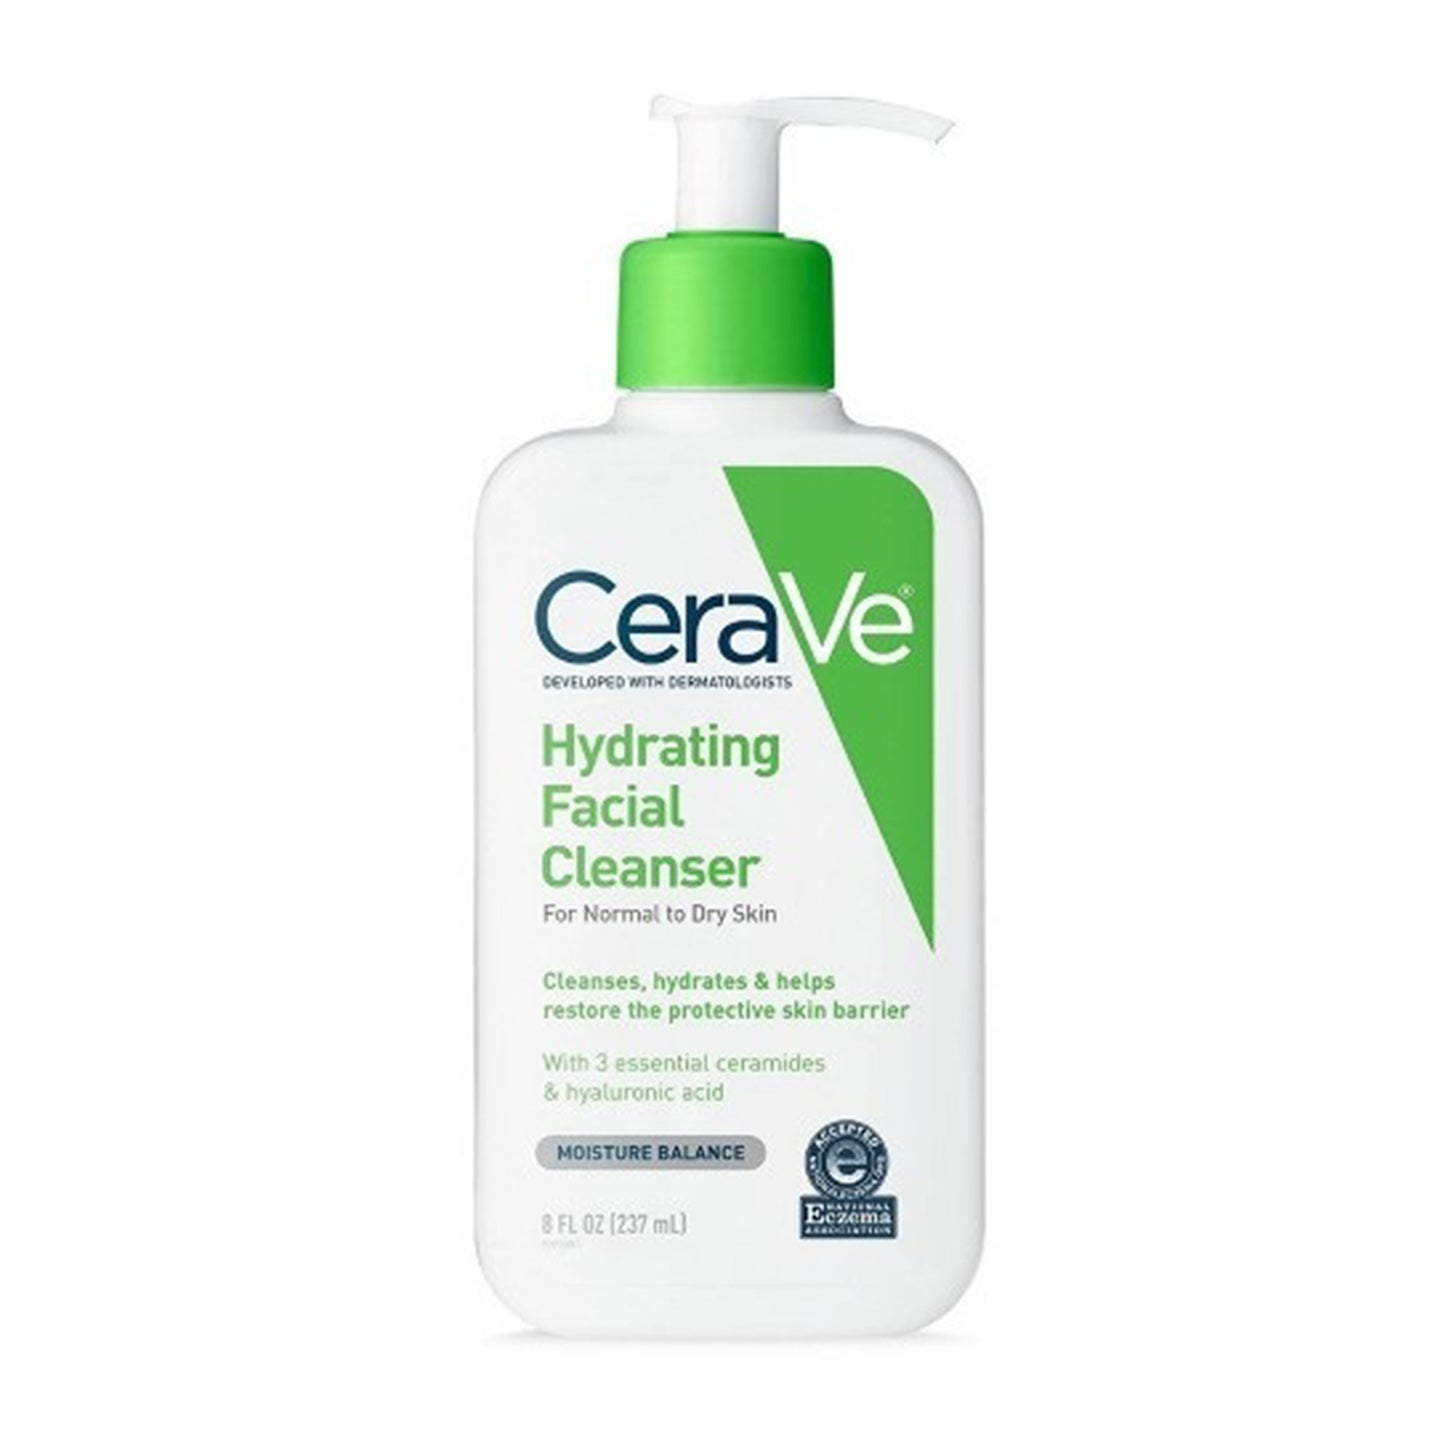 Shop CeraVe Hydrating Facial Cleanser for normal to dry skin available at Heygirl.pk for delivery in Pakistan